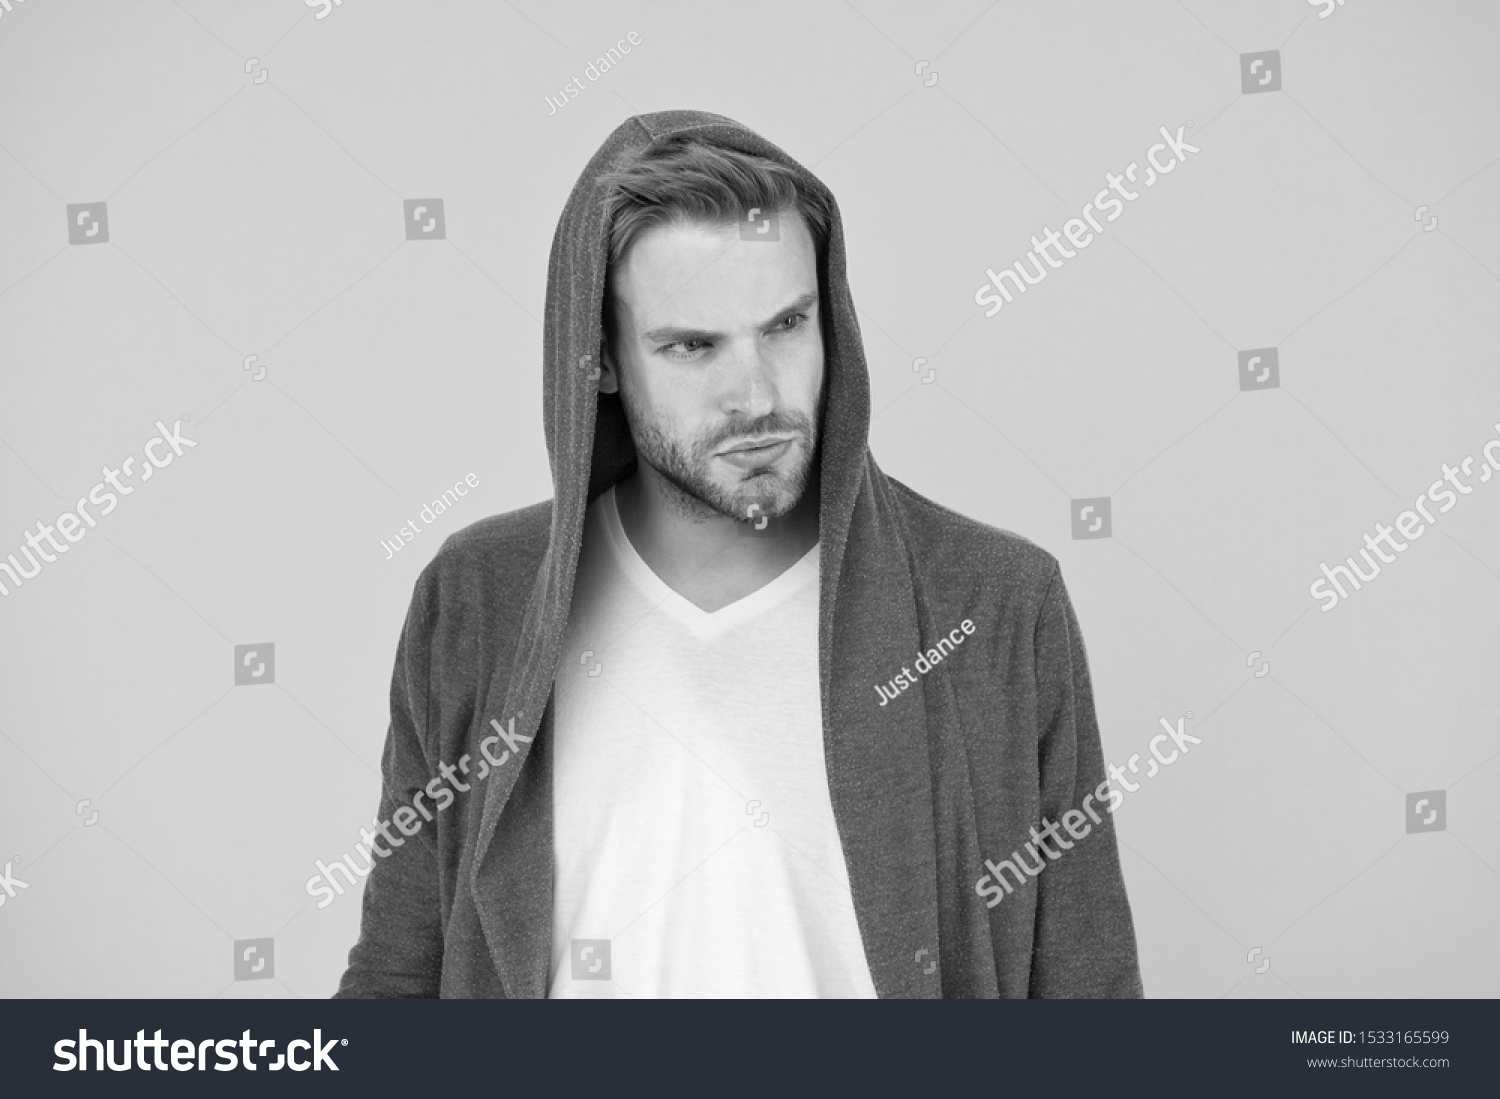 Desirable Appearance Male Beauty Masculinity Guy Stock Photo (Edit Now ...